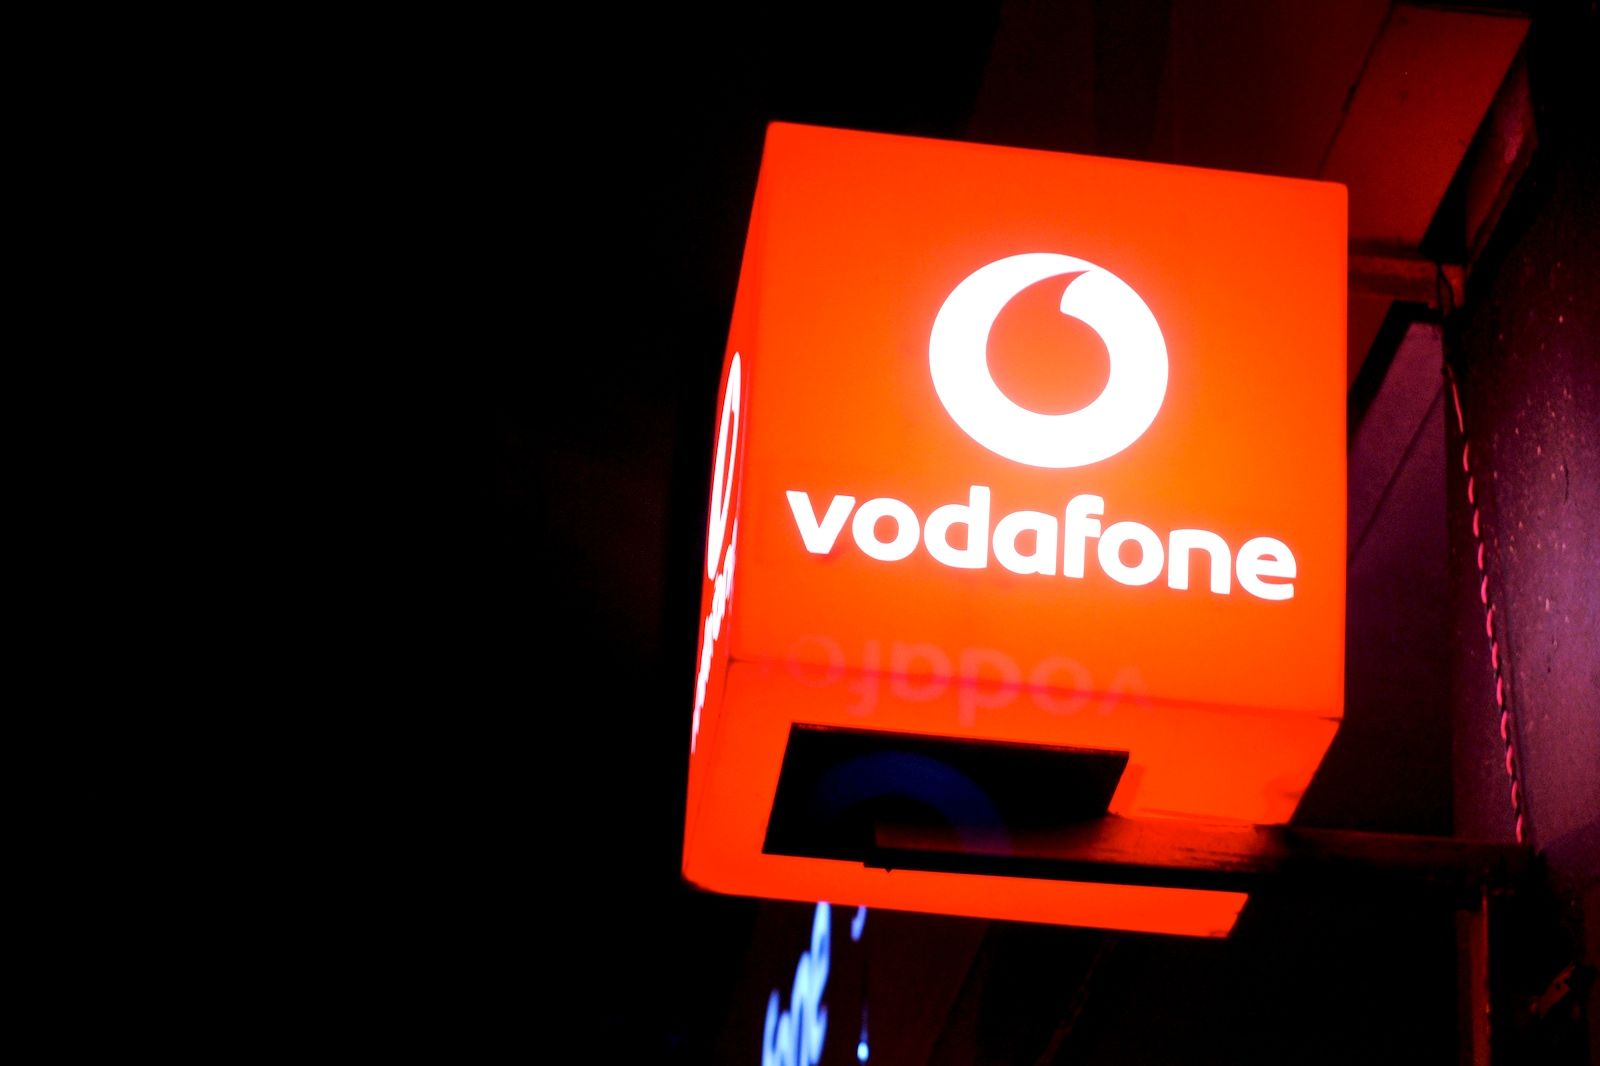 vodafone to buy 140 phones 4u stores and save 900 jobs image 1